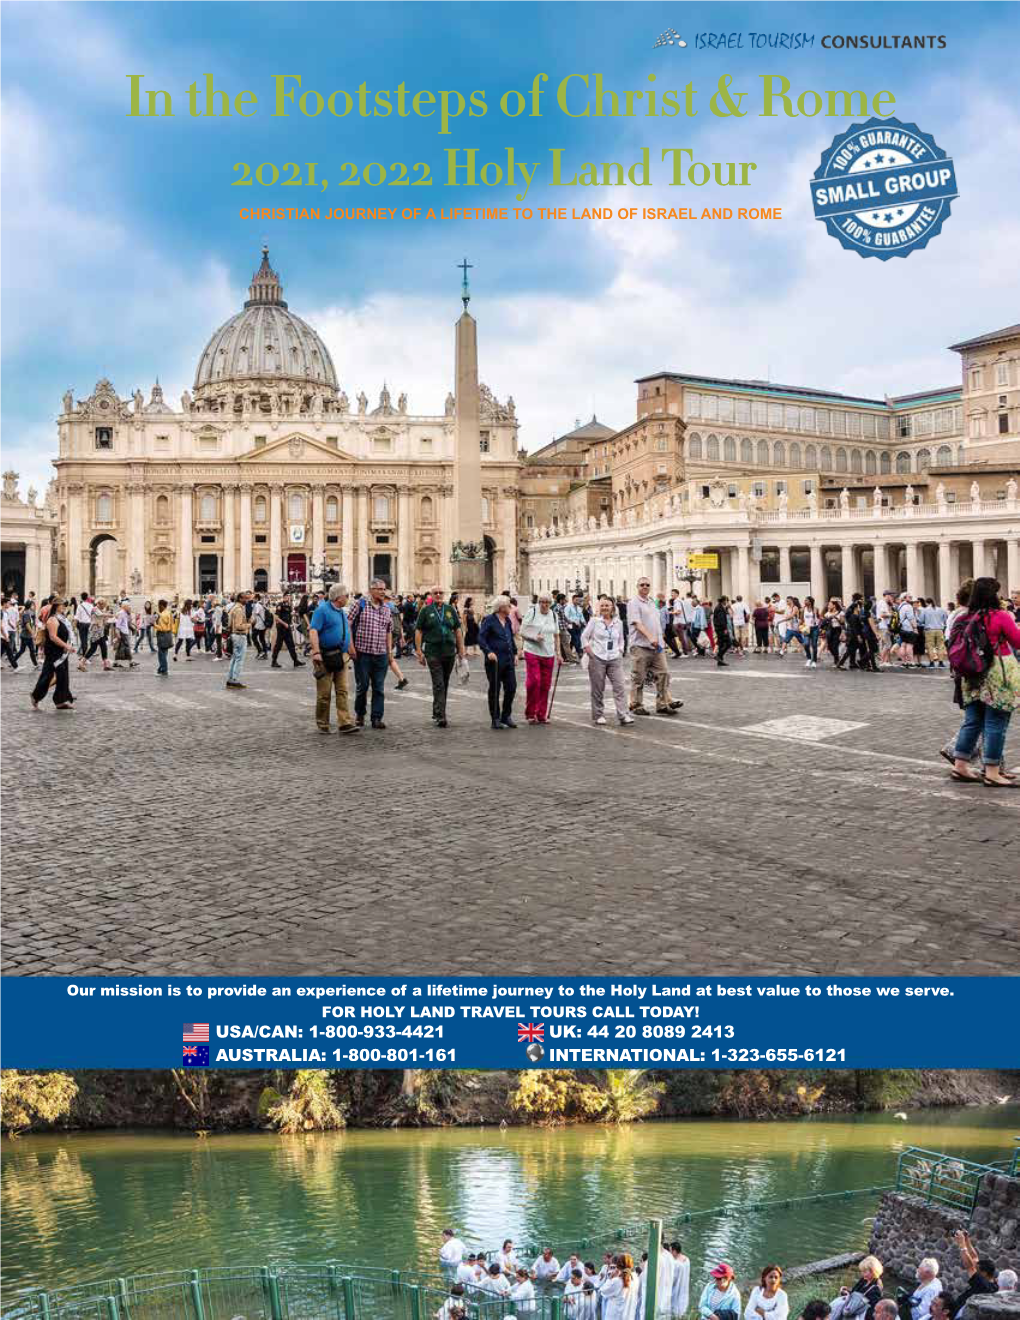 Footsteps of Christ & Rome Christian Holy Land Tour to Israel, Italy